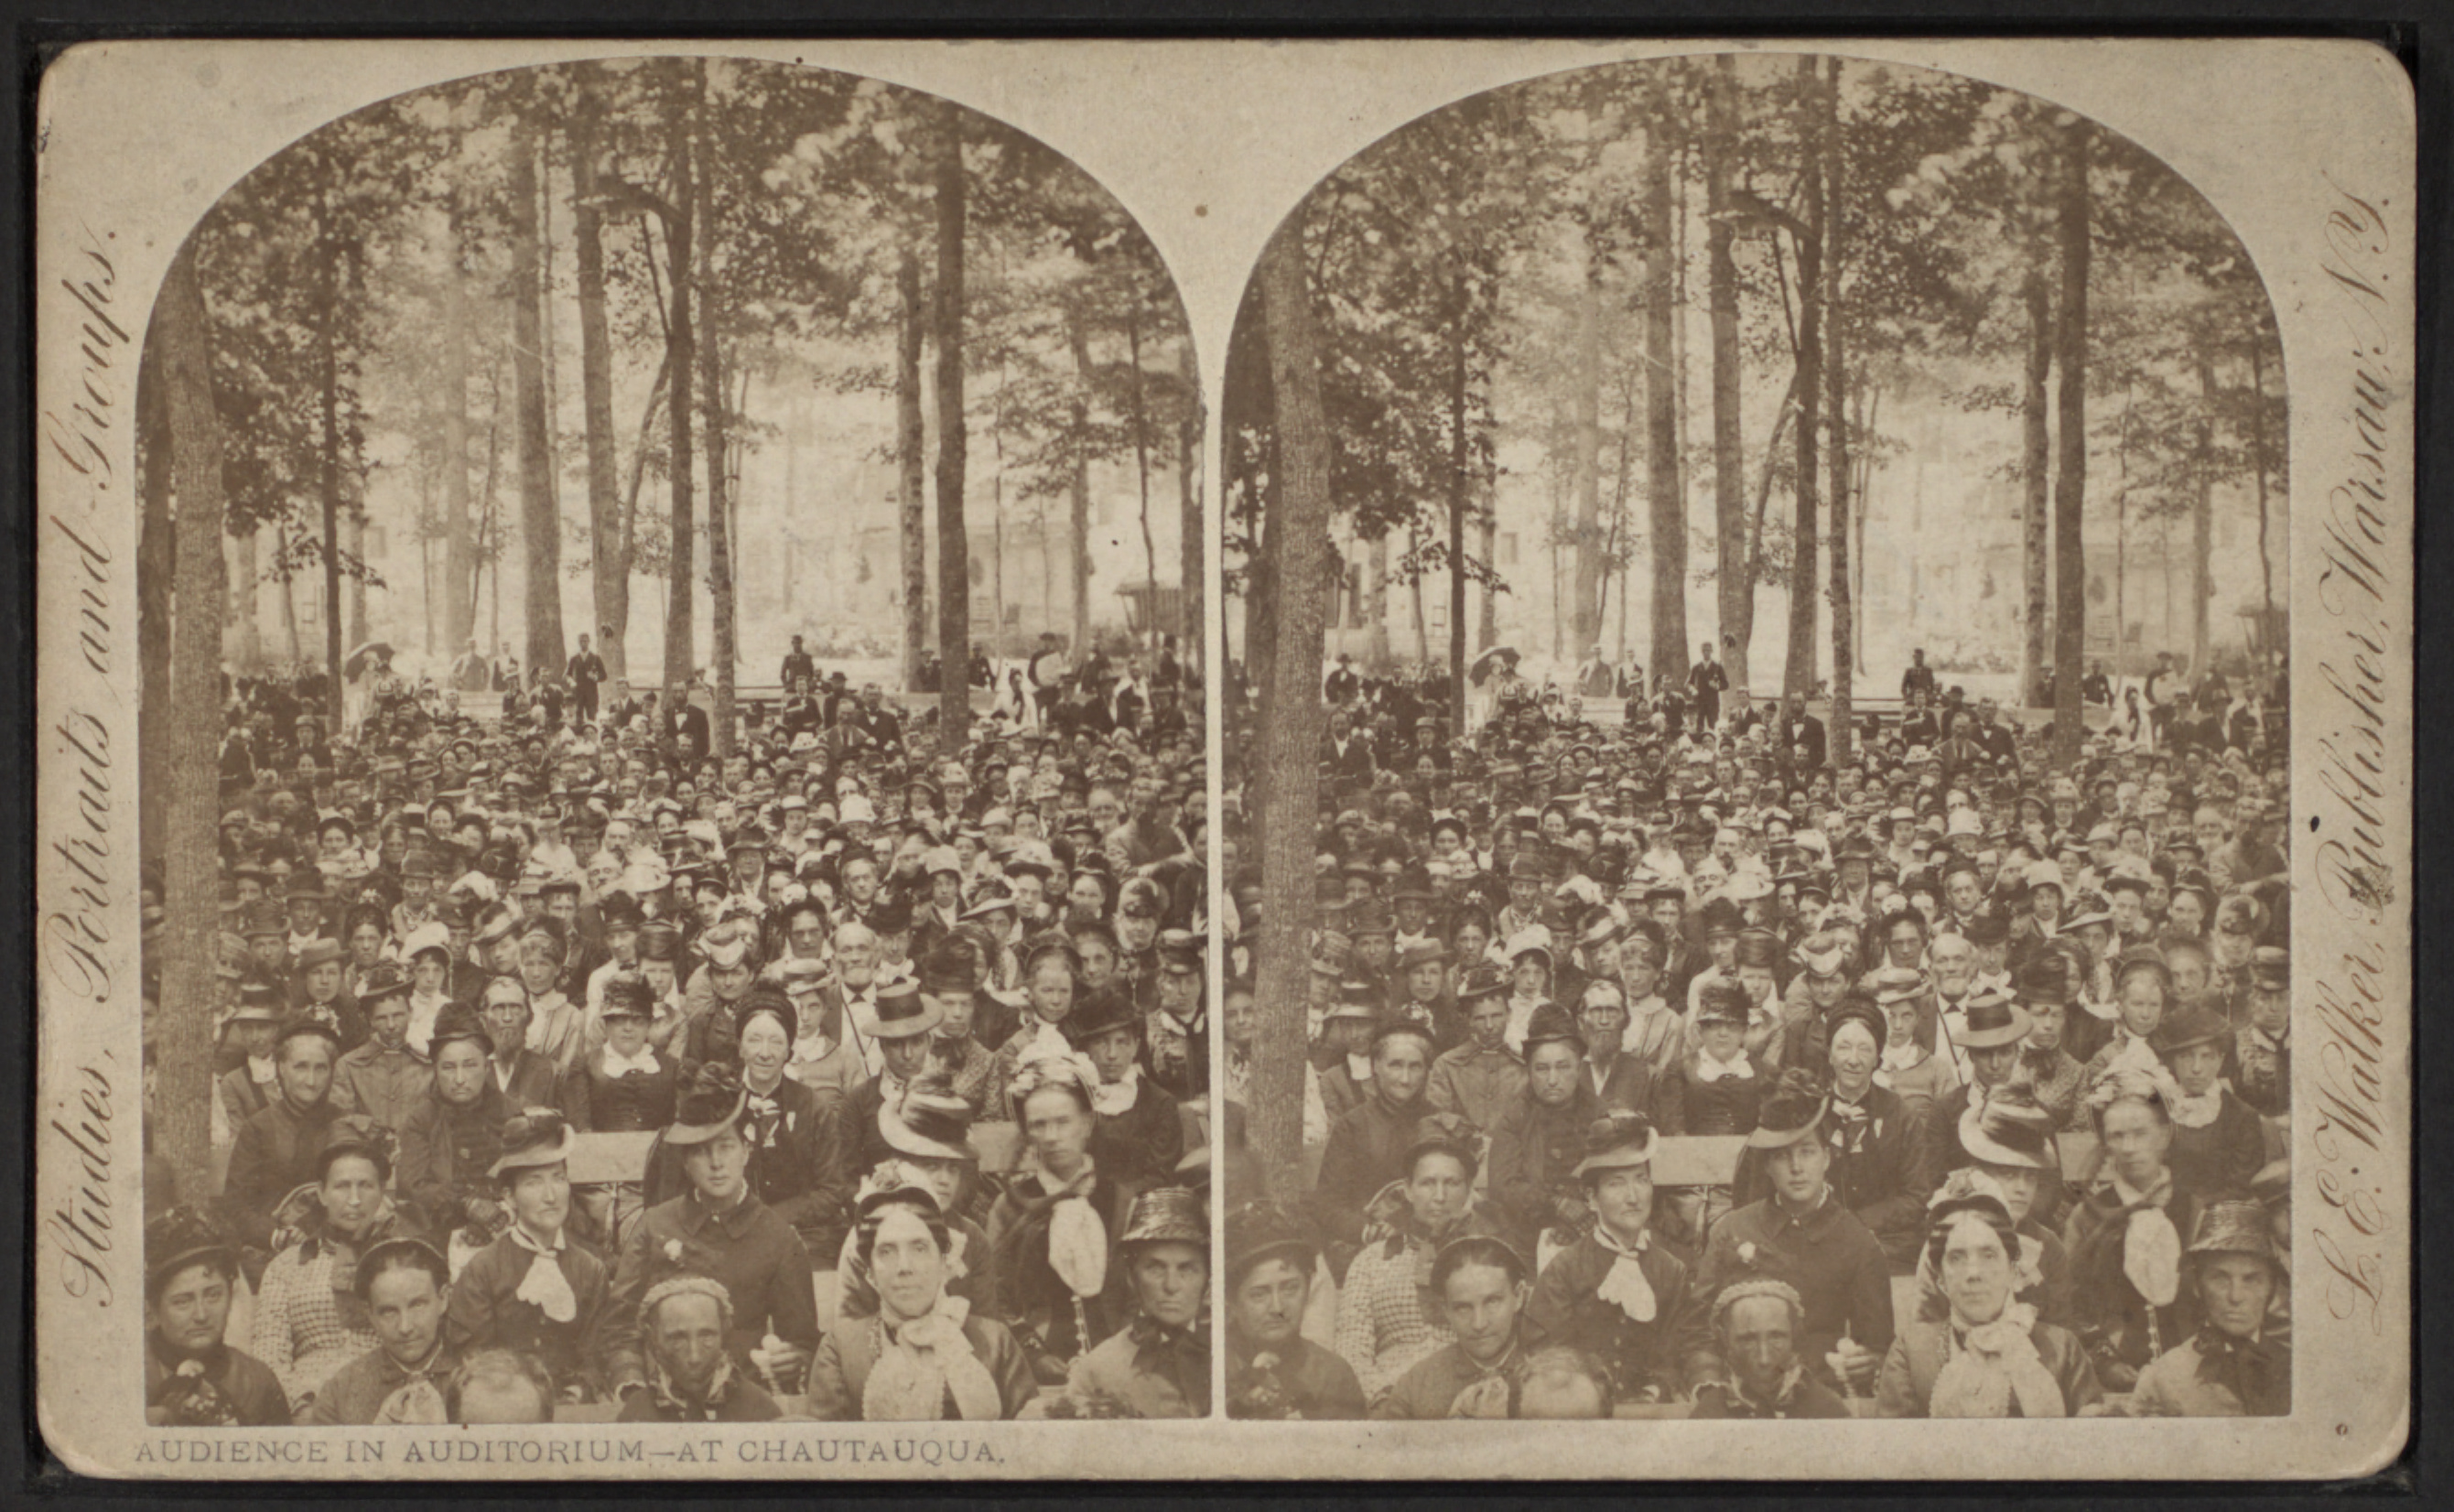 Audience in auditorium, at Chautauqua, by Walker, L. E., 1826-1916